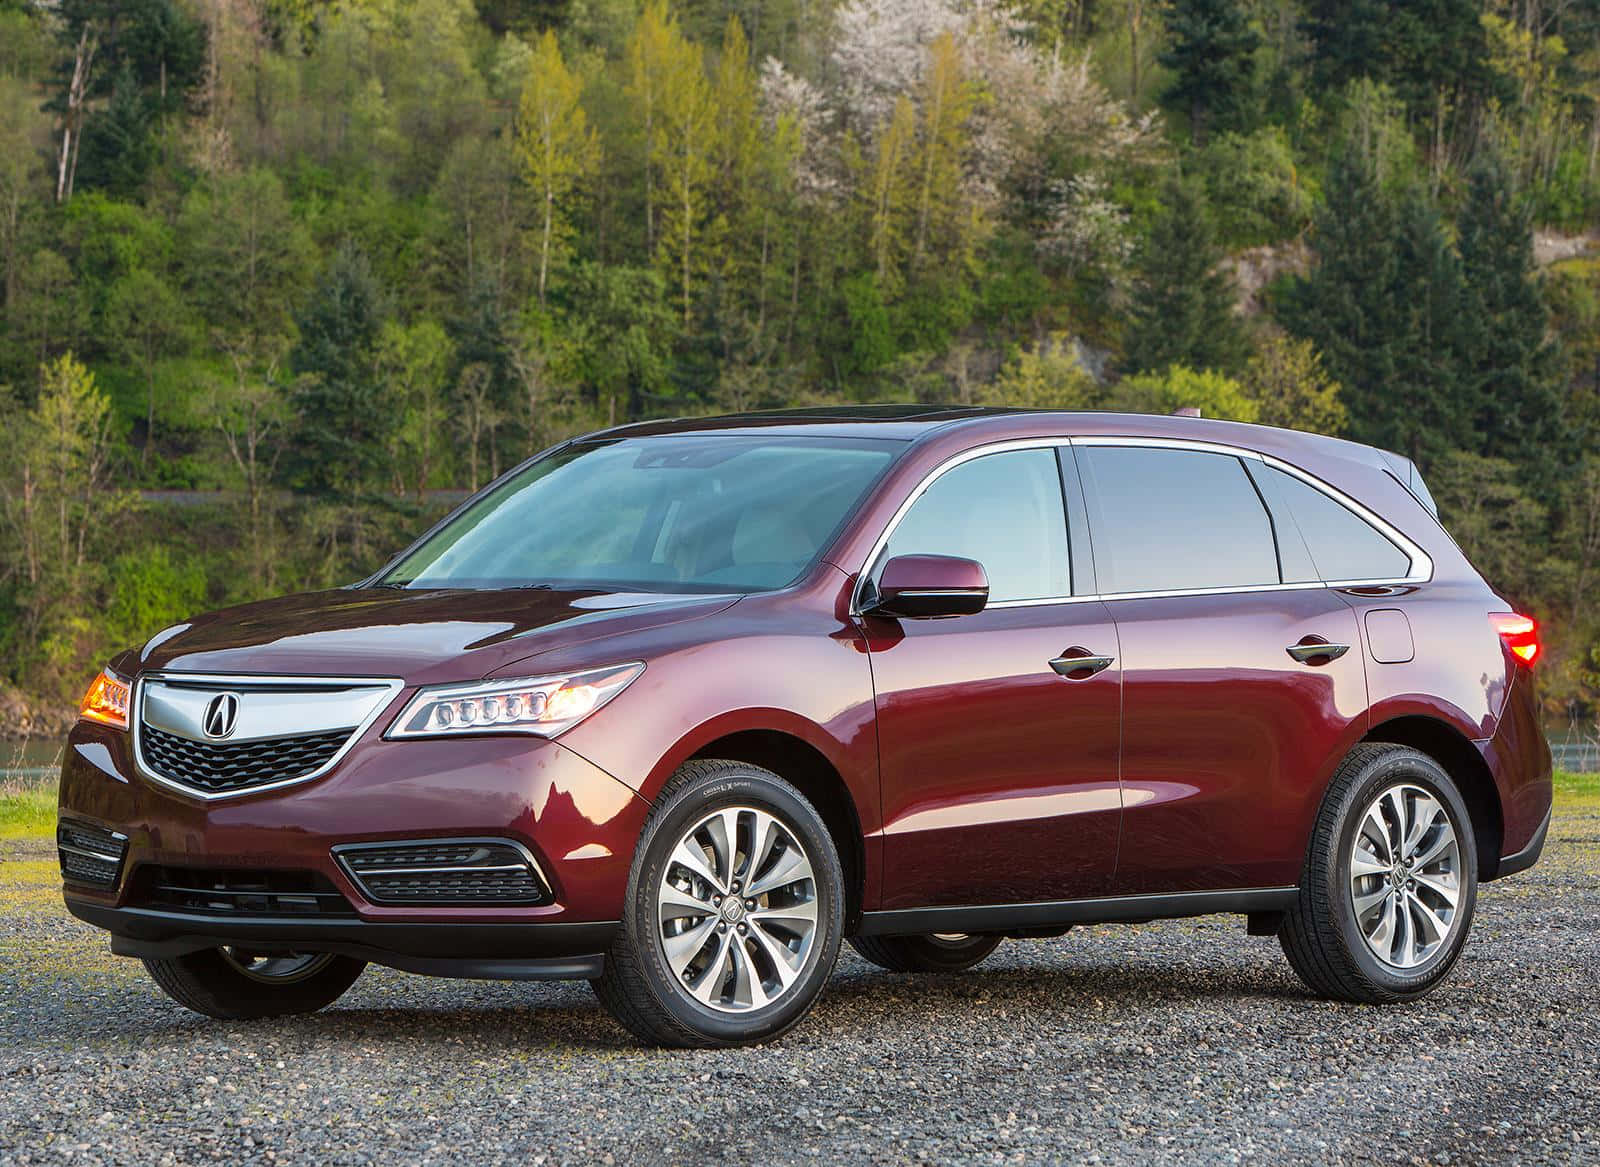 Sleek and Stylish Acura MDX on the Road Wallpaper